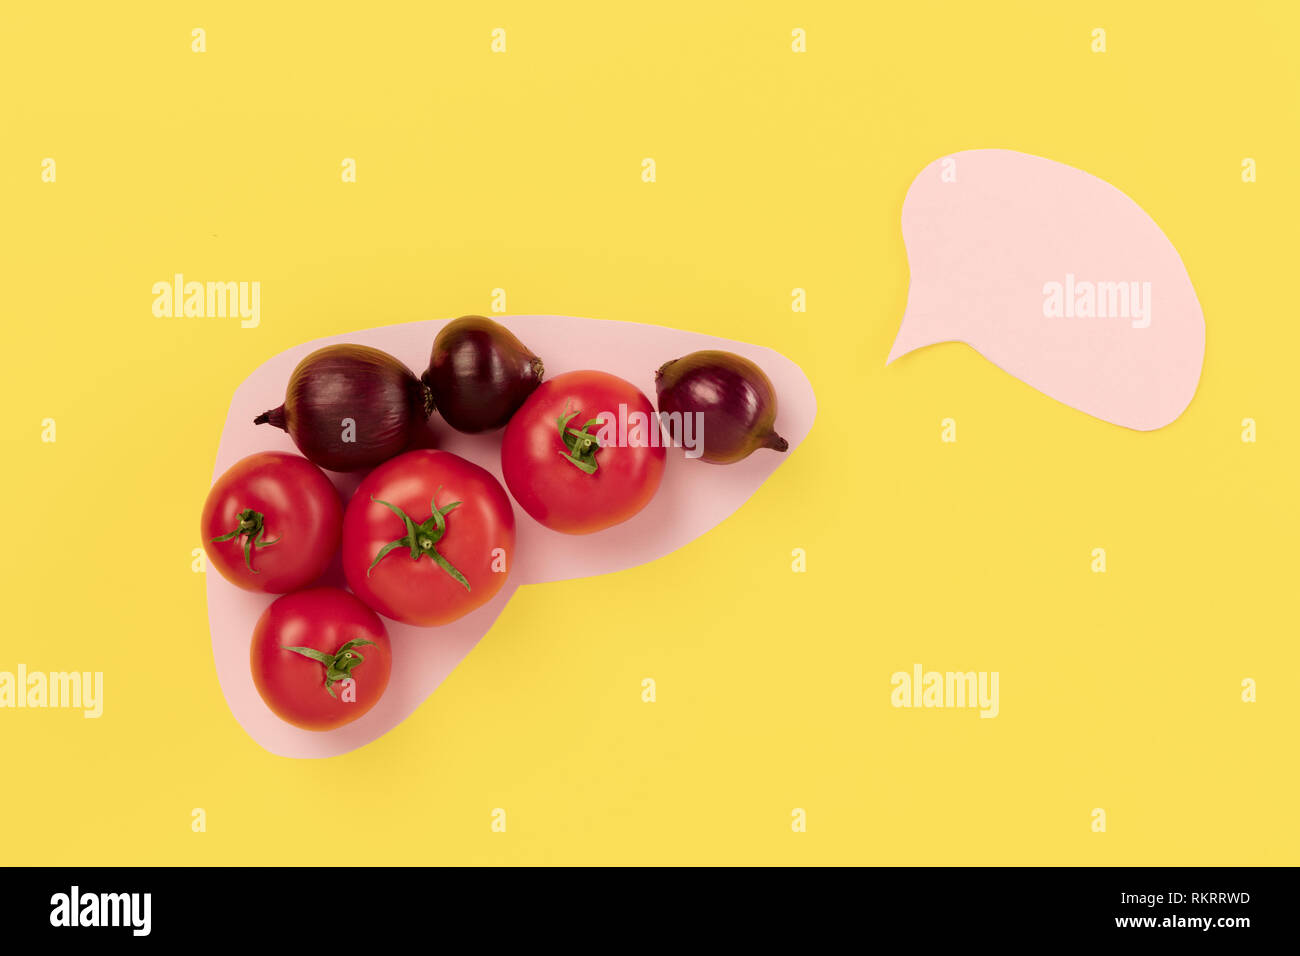 Concept A Yellow Pill Filled with Falling Vegetables, Healthy Eating,  Nutritional, Eat your Vegetable, Prescription Diet, Food Group Stock Photo  - Alamy